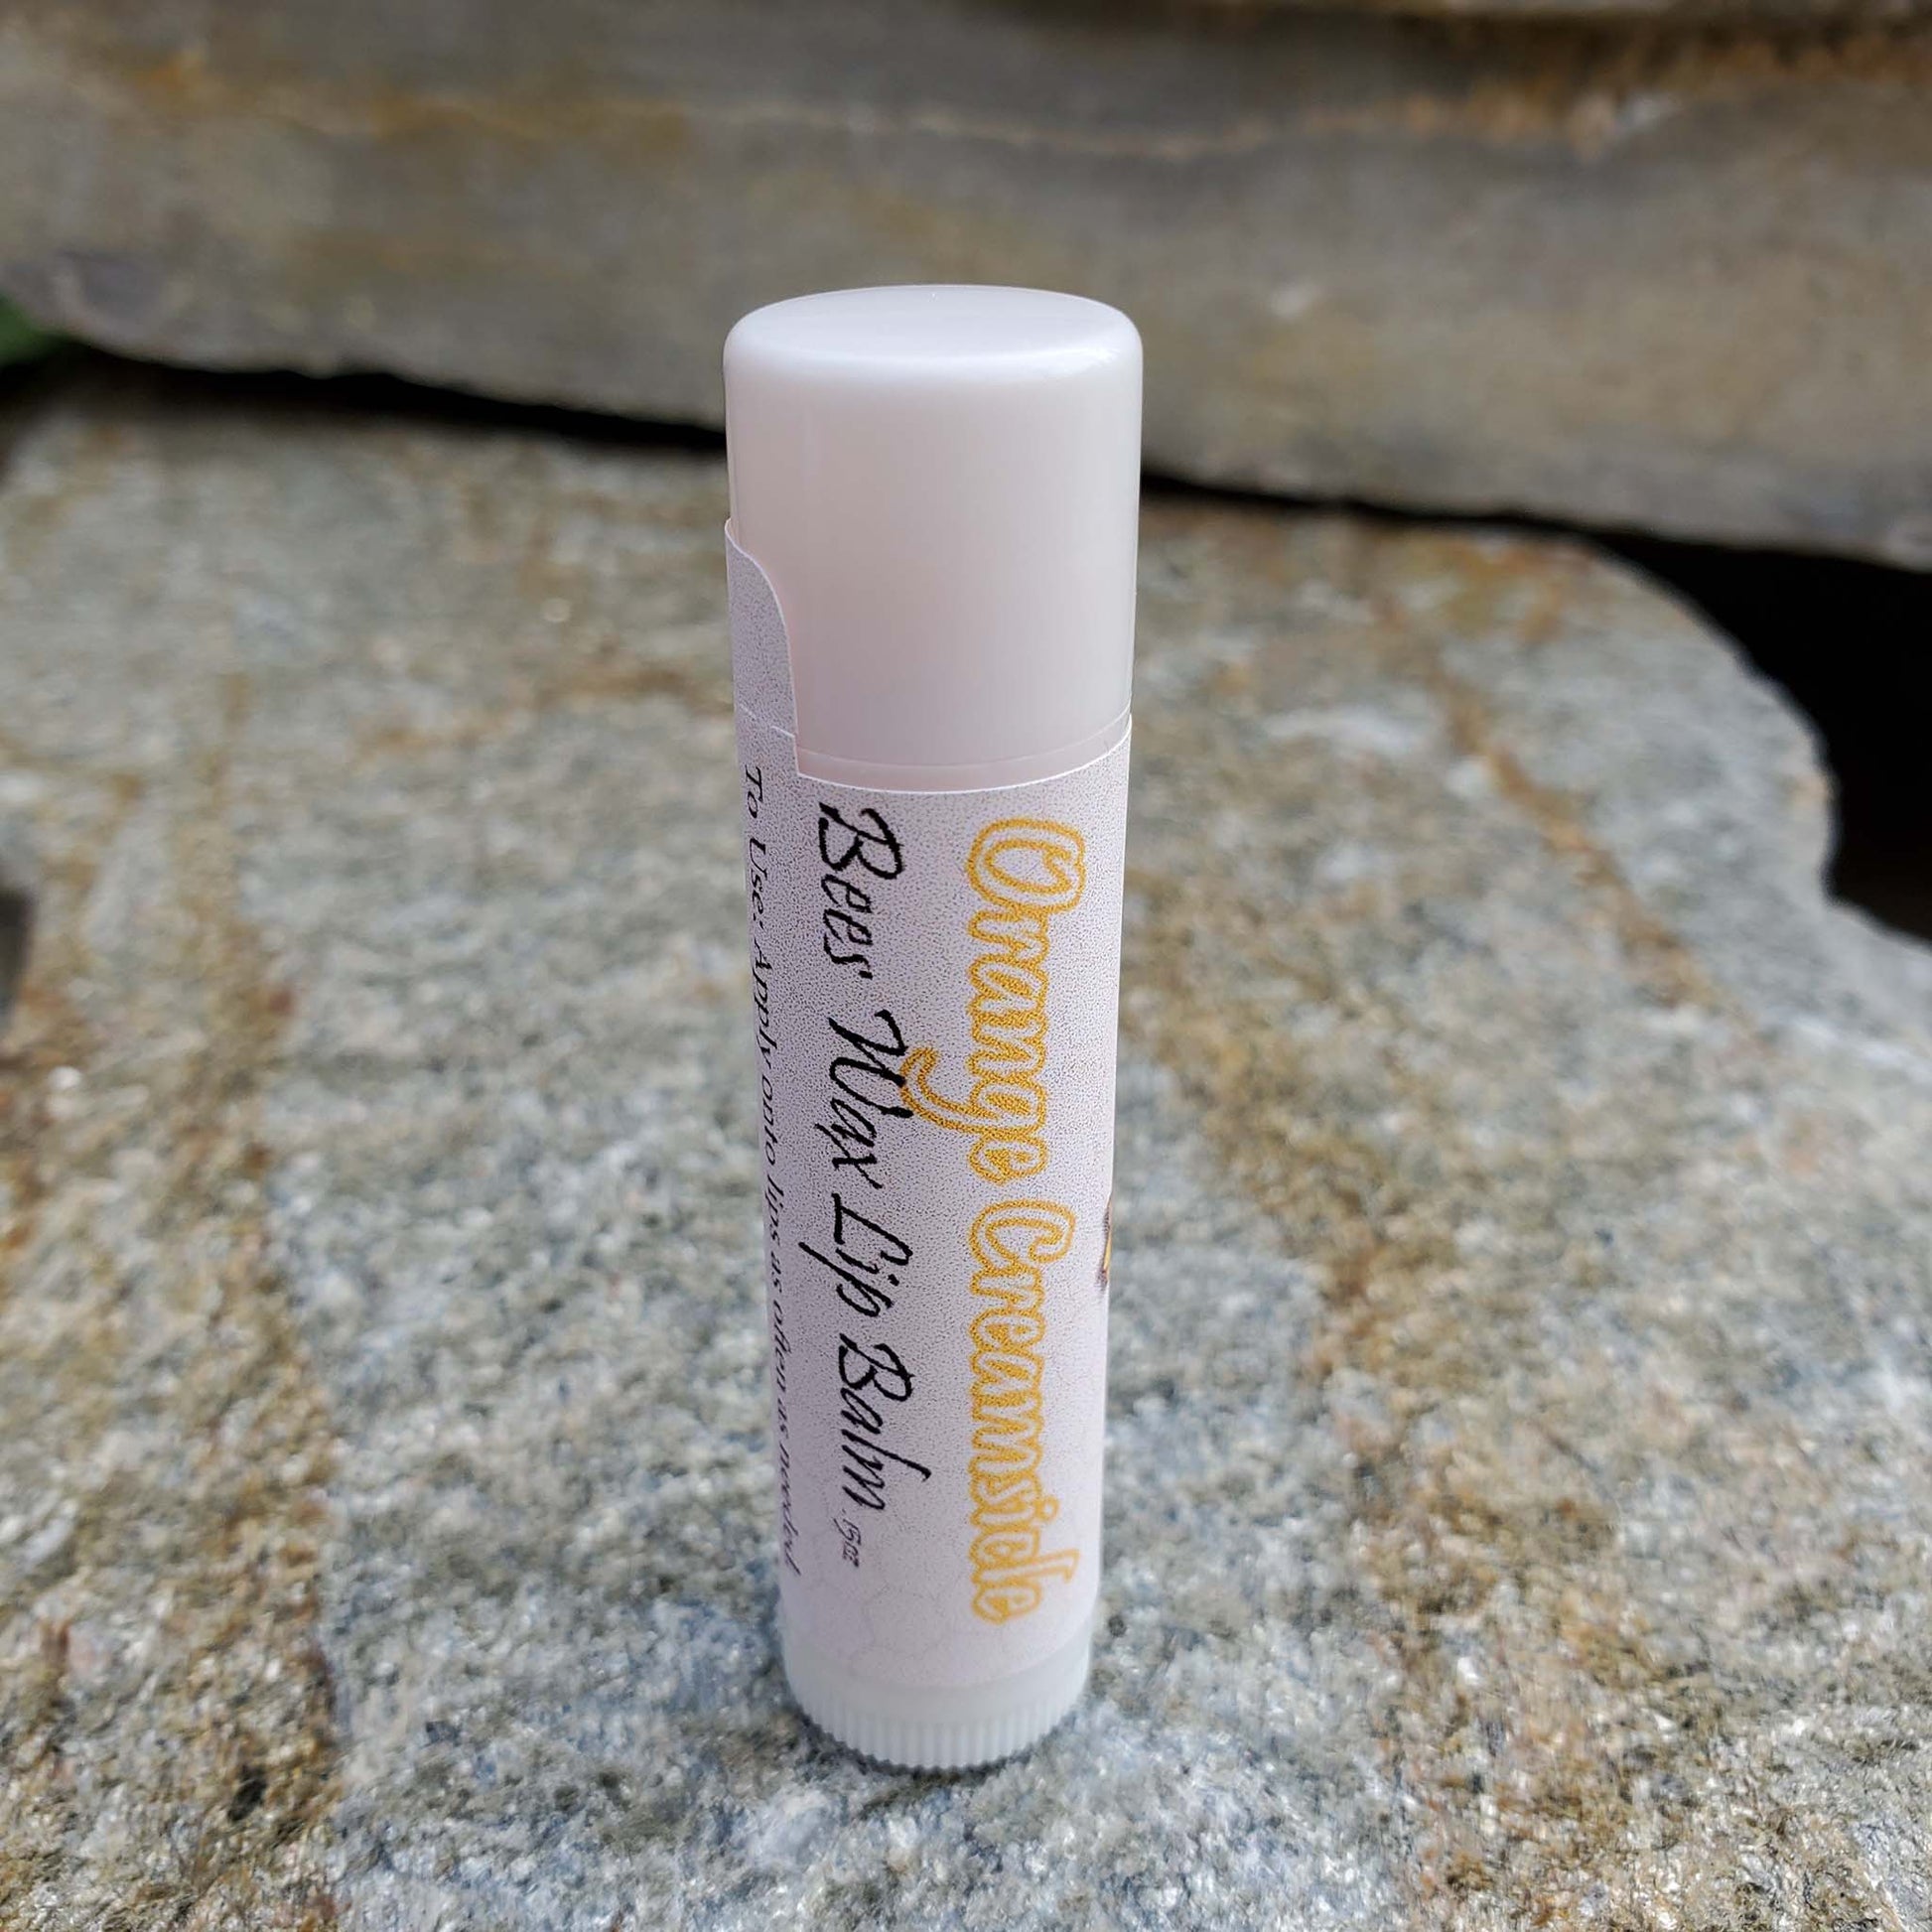 Orange Creamsicle Bees Wax Lip Balm From Bee Your Own Valentine